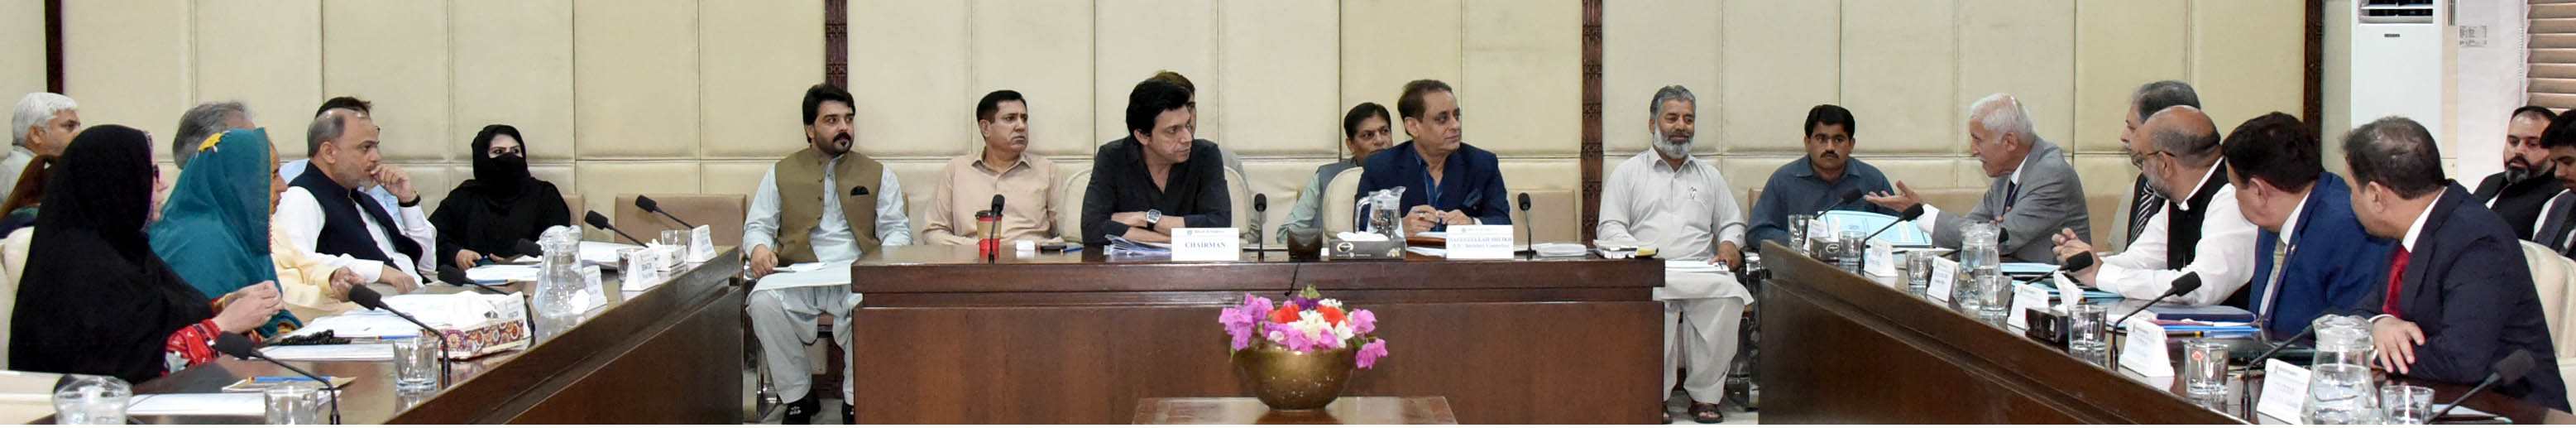 Senator Muhammad Faisal Vawda, Chairman Senate Standing Committee on Maritime Affairs presiding over a meeting of The Committee at Parliament House Islamabad